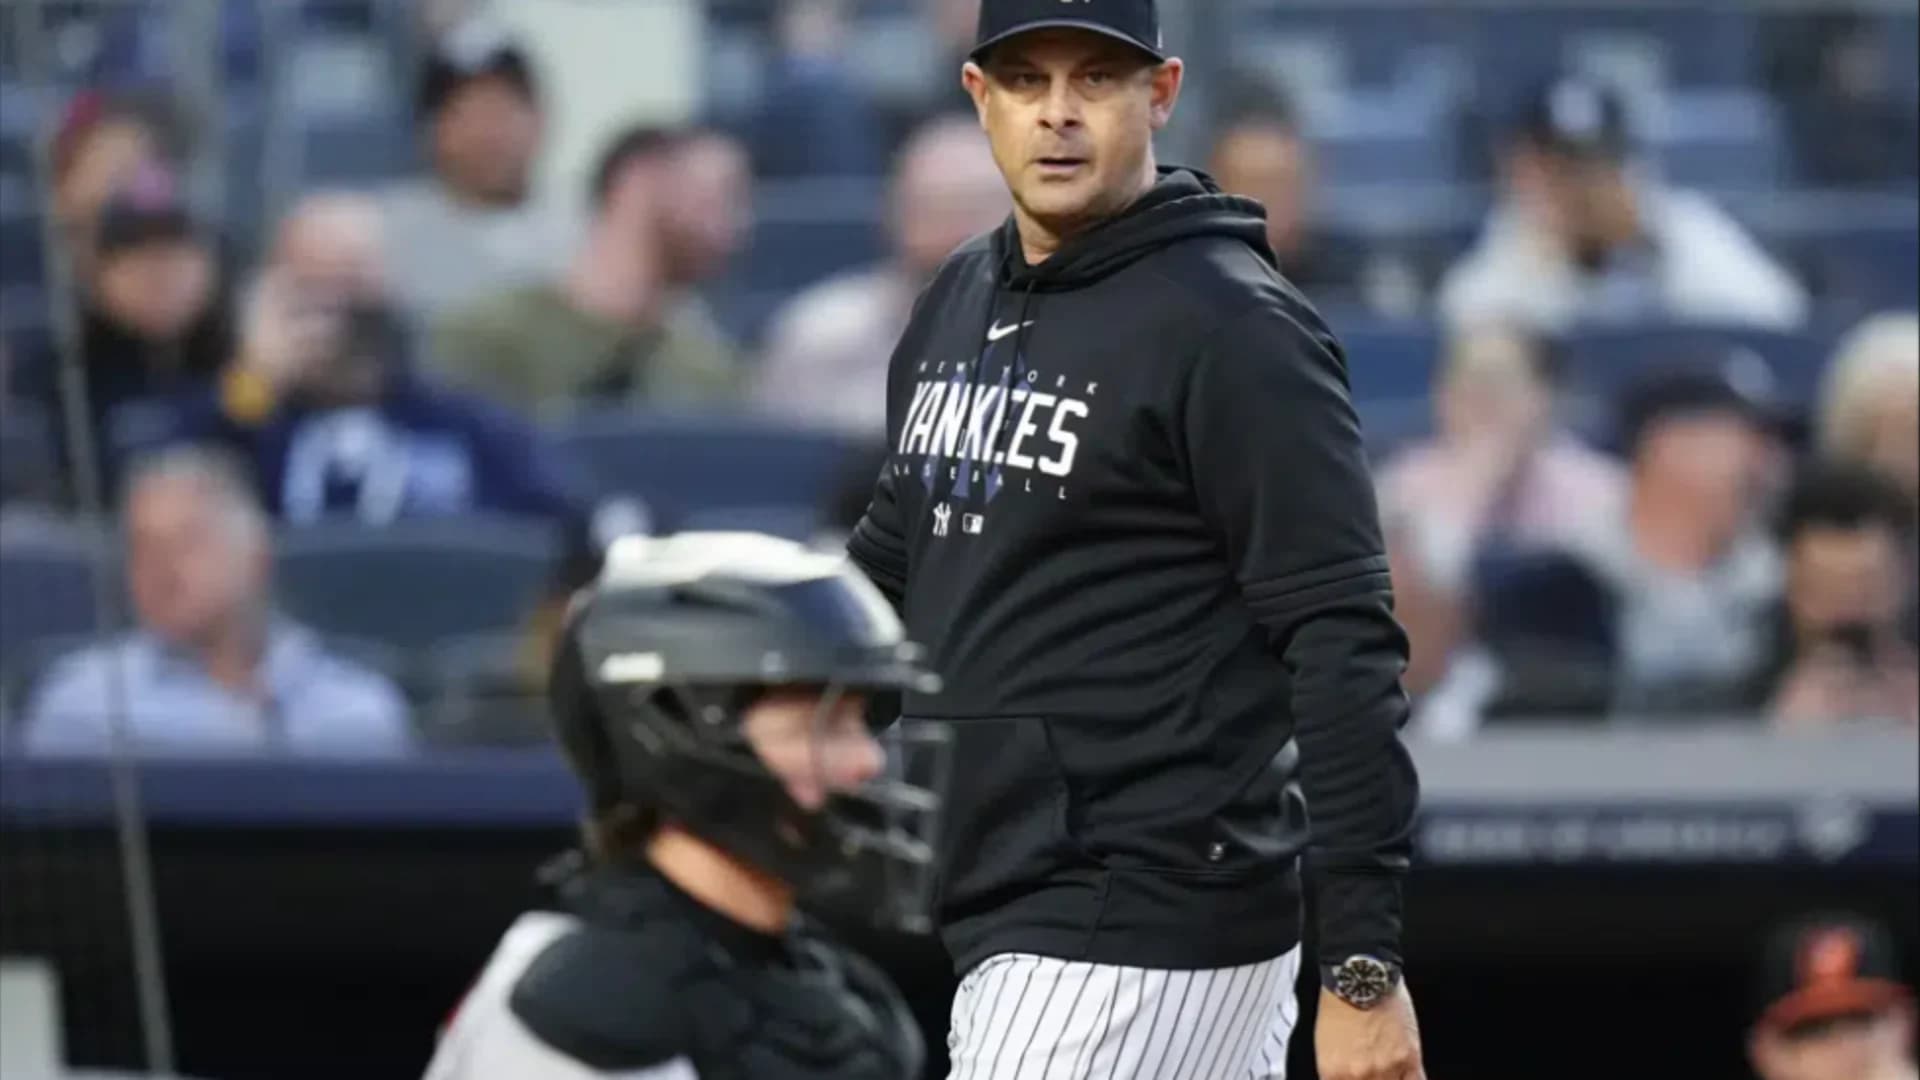 Yankees’ Aaron Boone suspended 1 game by MLB for conduct toward umpires